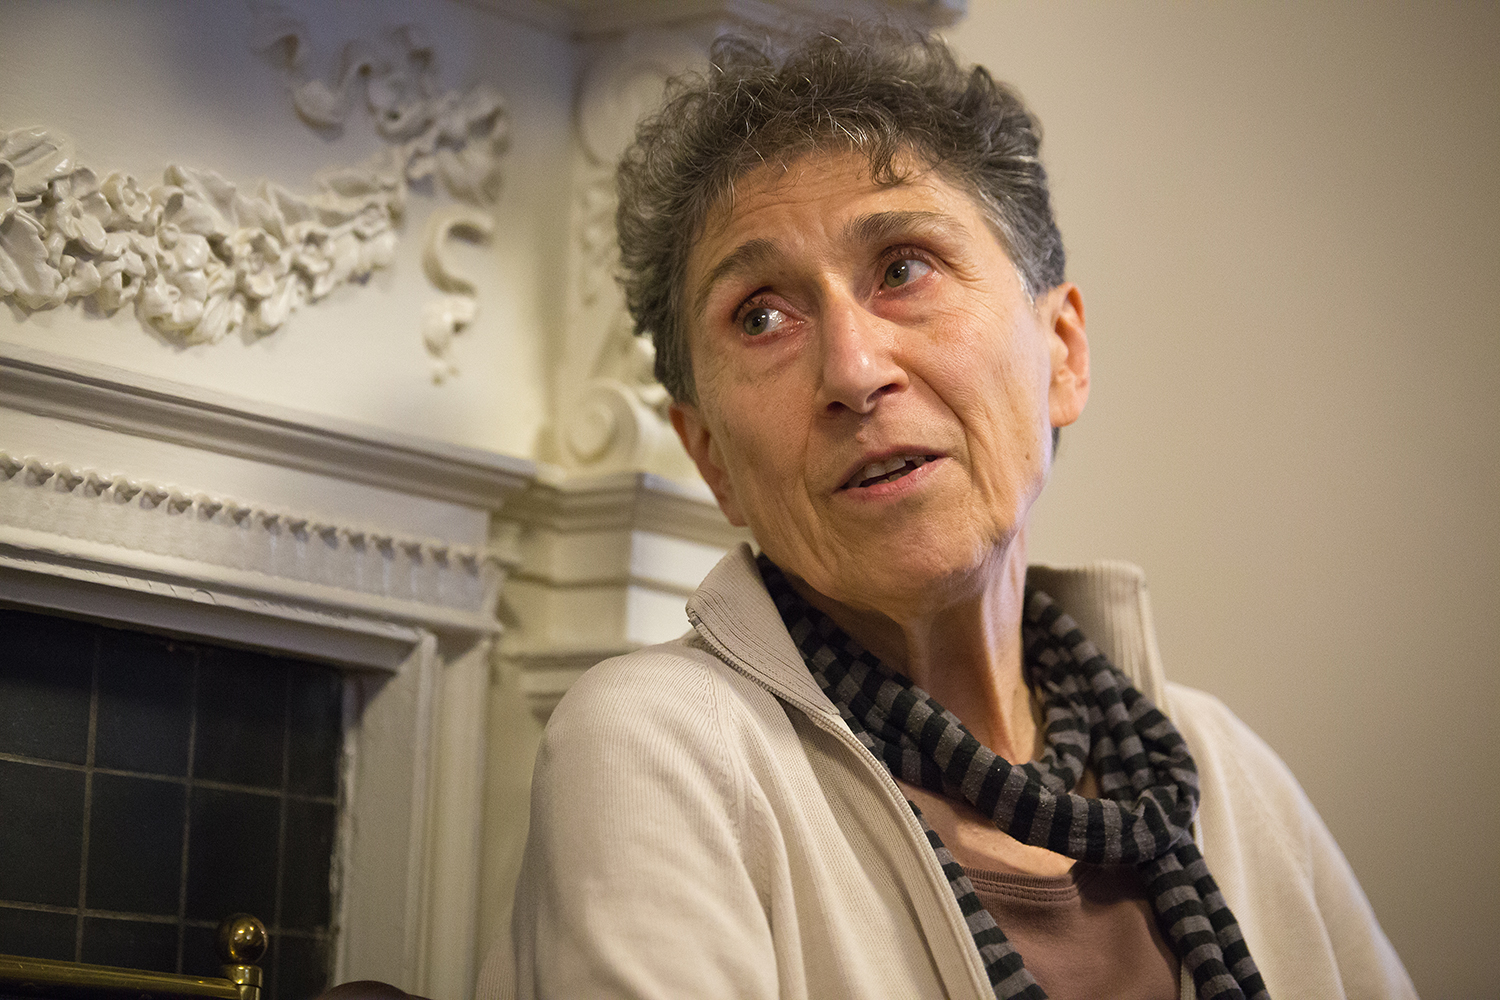 Theorist, historian and activist Silvia Federici spoke to faculty and students at the Center for African American Studies on Sept. 25.